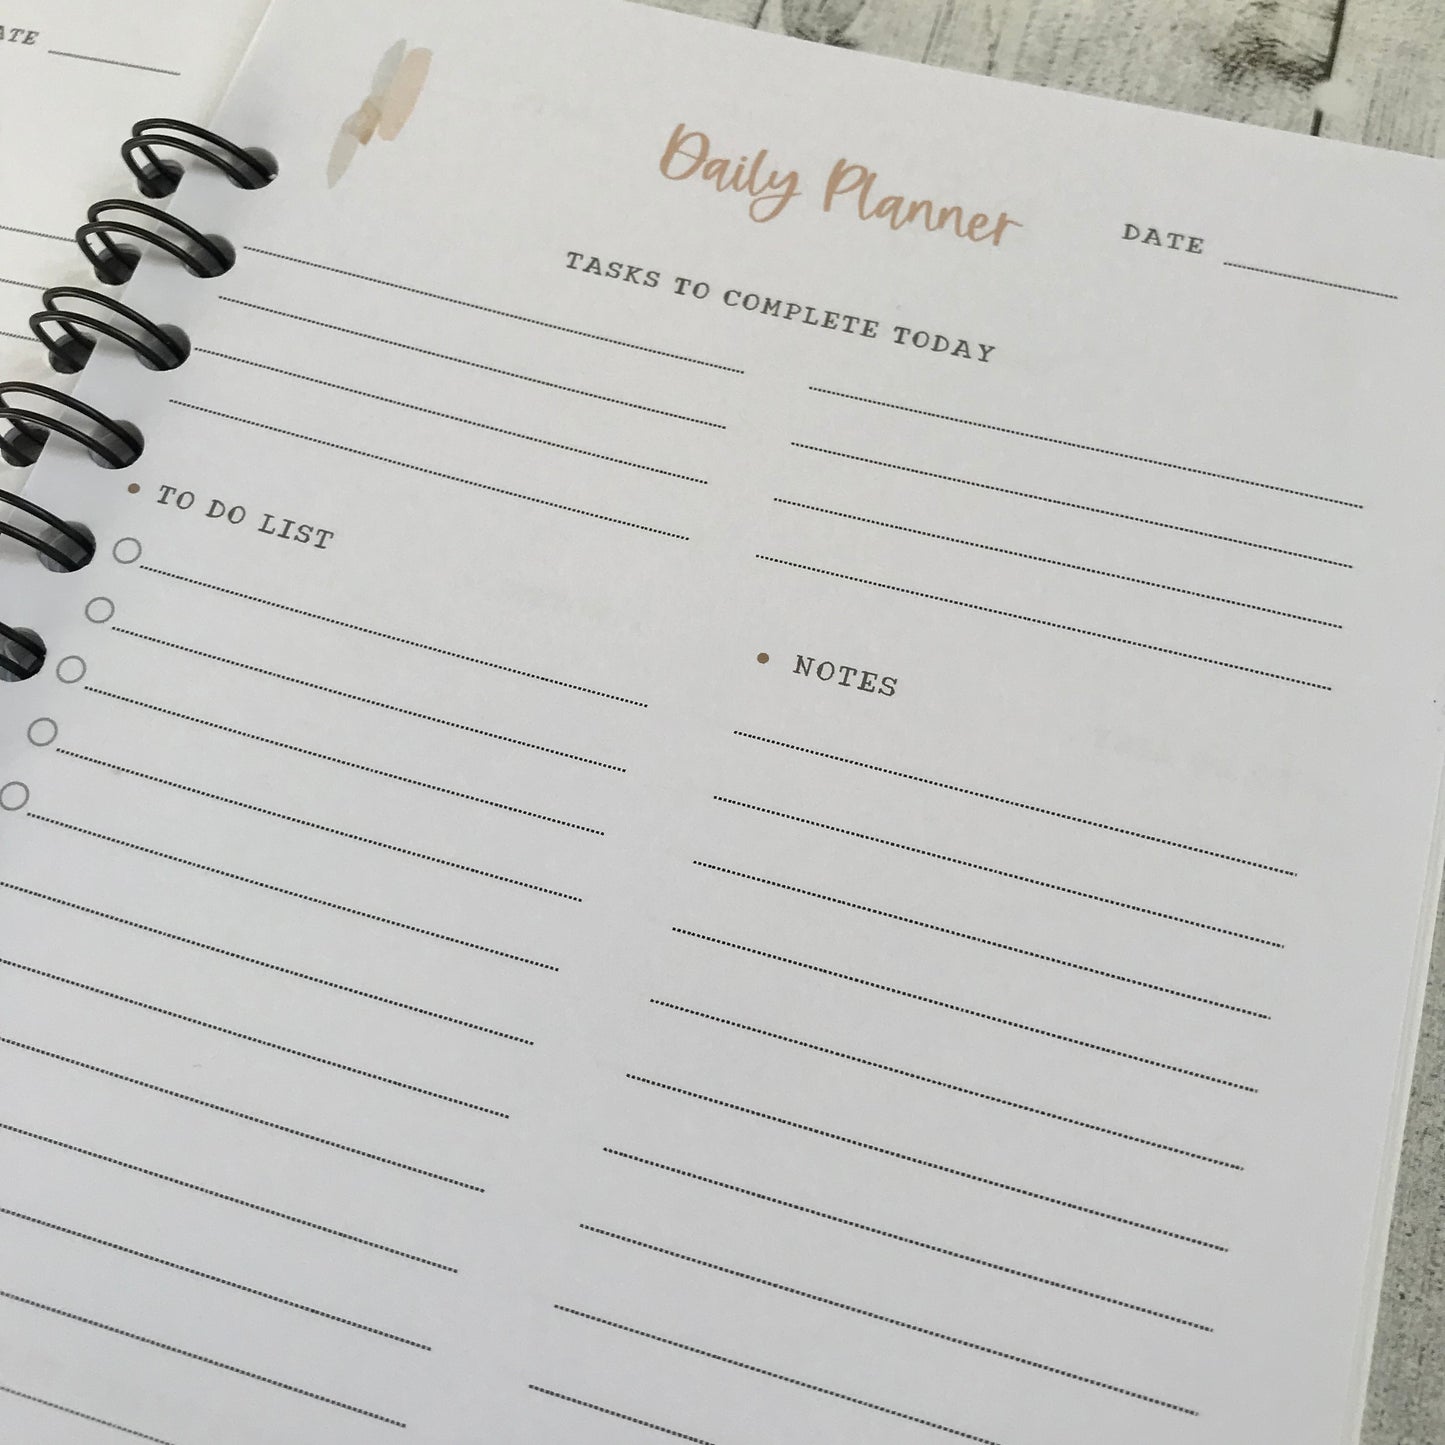 Daily Planner For Small Business